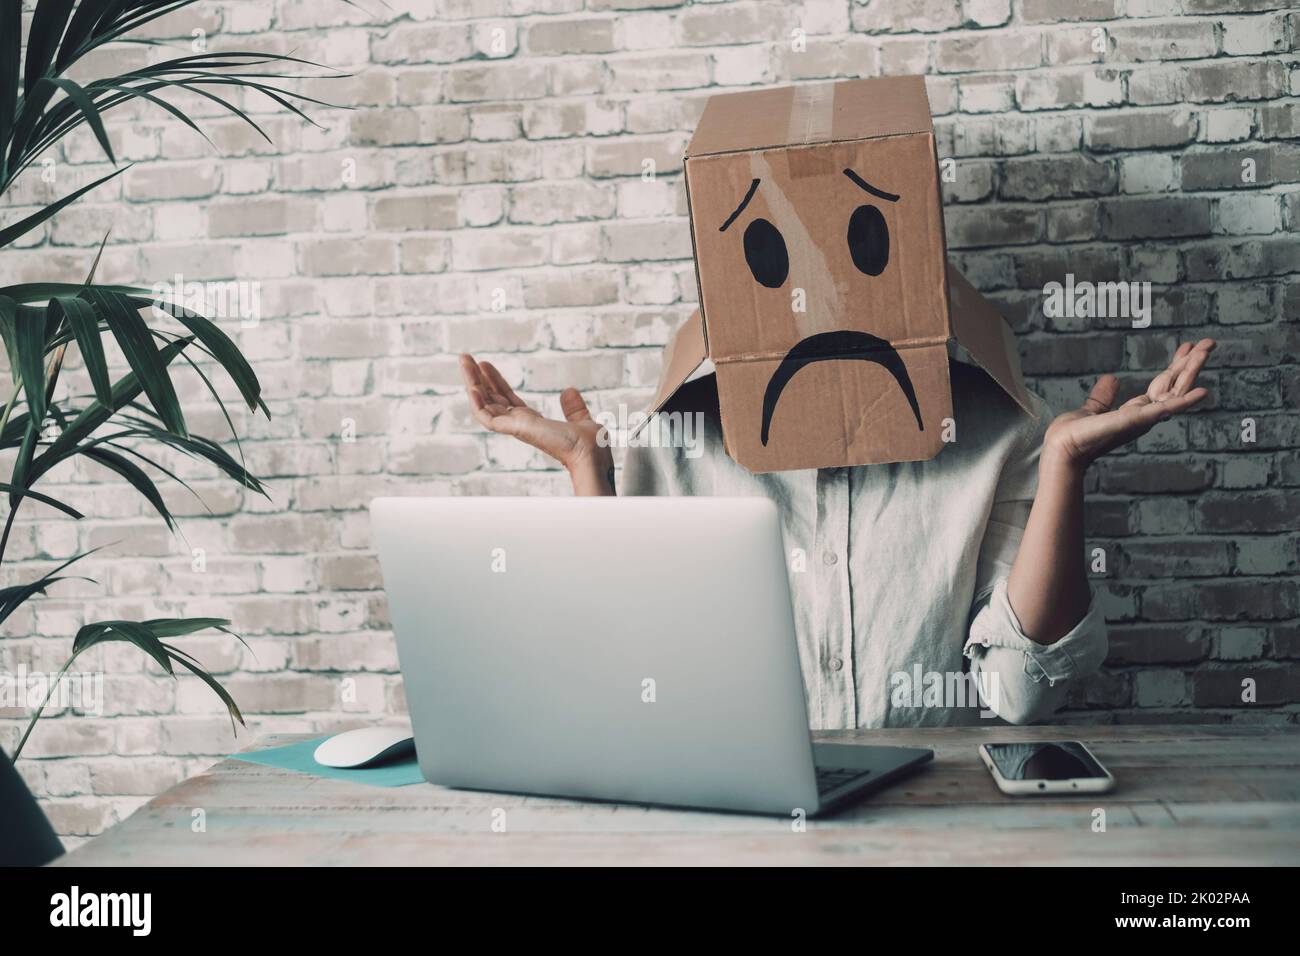 Modern worker with carton sad box on head open arms with desolation gesture in front of a laptop. Online crypto smart working business job activity. Concept of fail and lost work. Bad day office Stock Photo